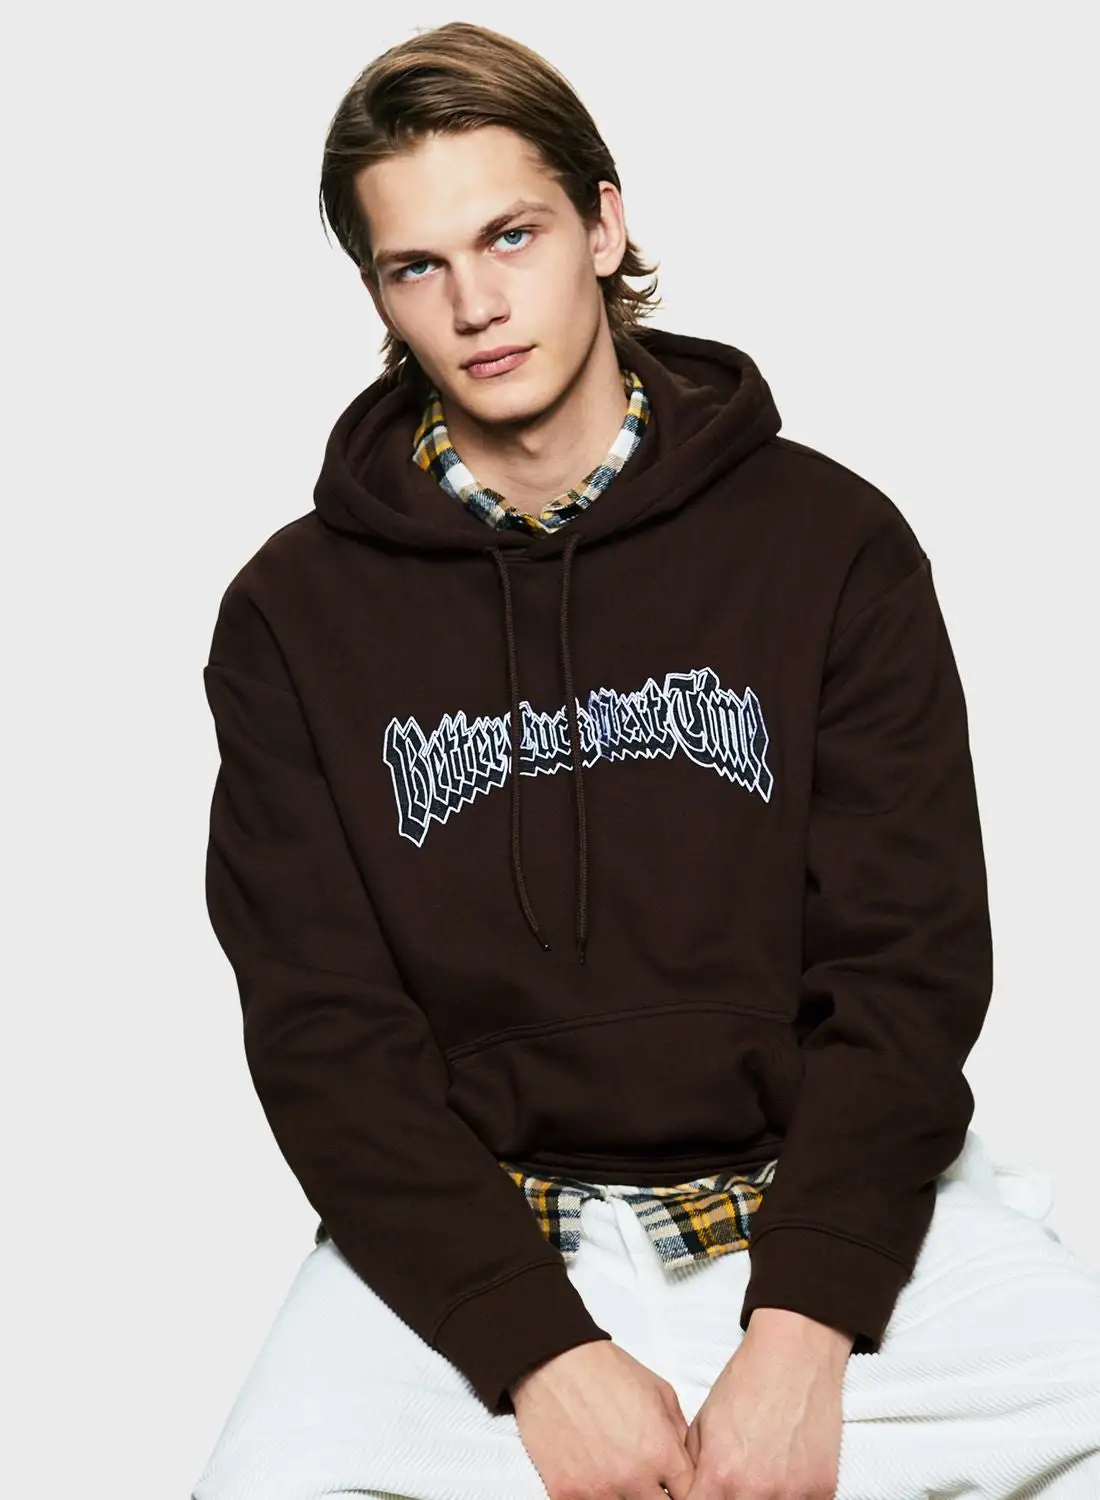 H&M Relaxed Fit Hoodie